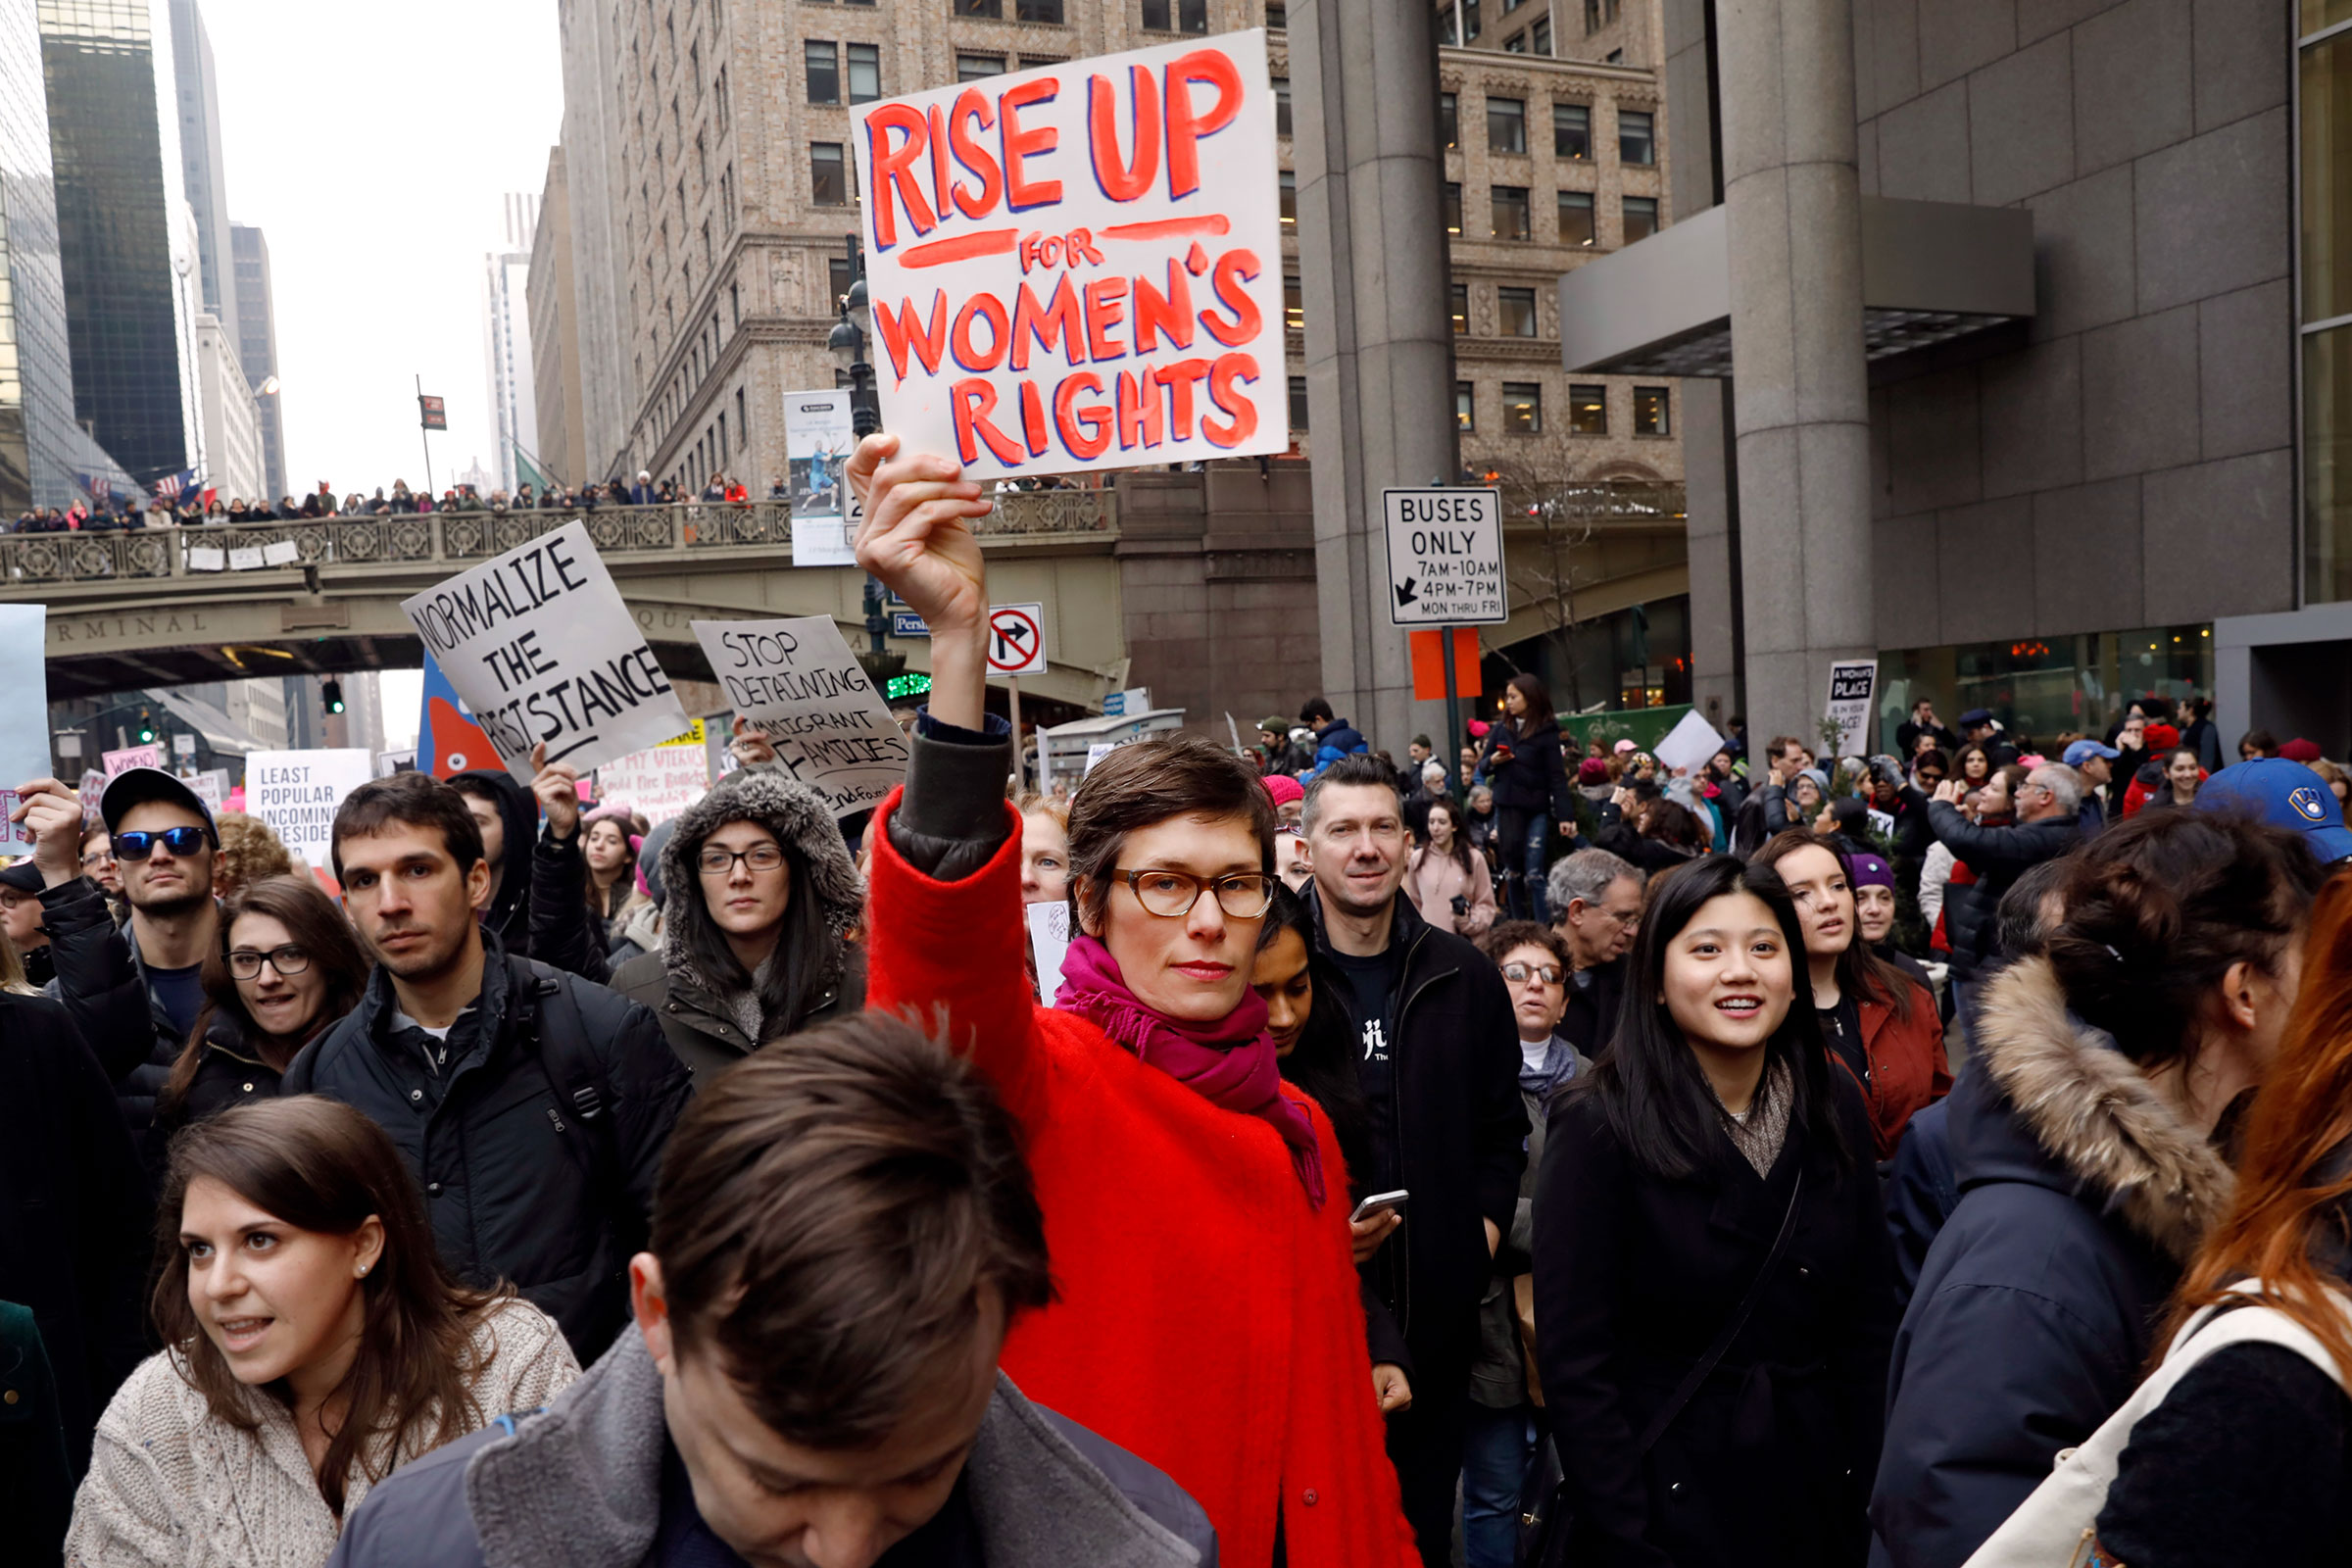 Women rising: Women’s activism that has shaped the world